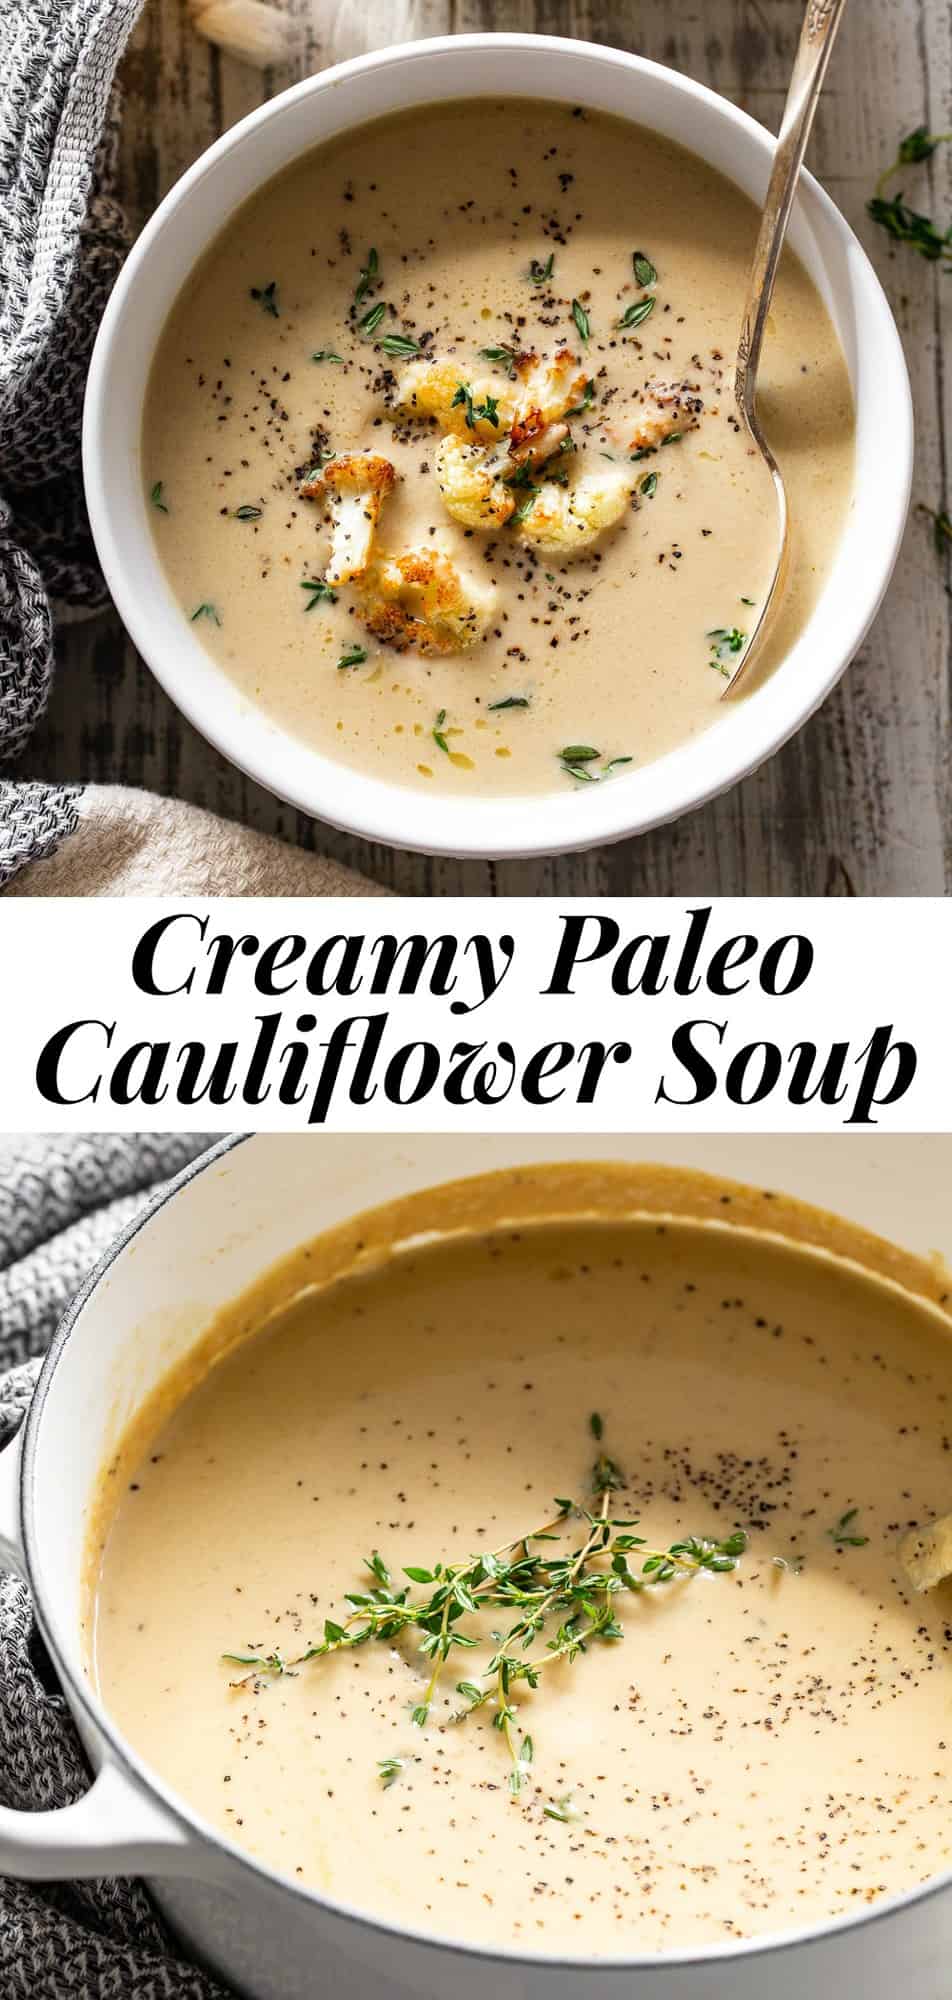 This creamy cauliflower soup is a breeze to make, packed with flavor and so comforting! The texture and flavor will have you convinced there must be dairy in it, but there’s none! It’s paleo friendly, Whole30 compliant, low carb and keto. #whole30 #paleo #lowcarb #keto #cleaneating 